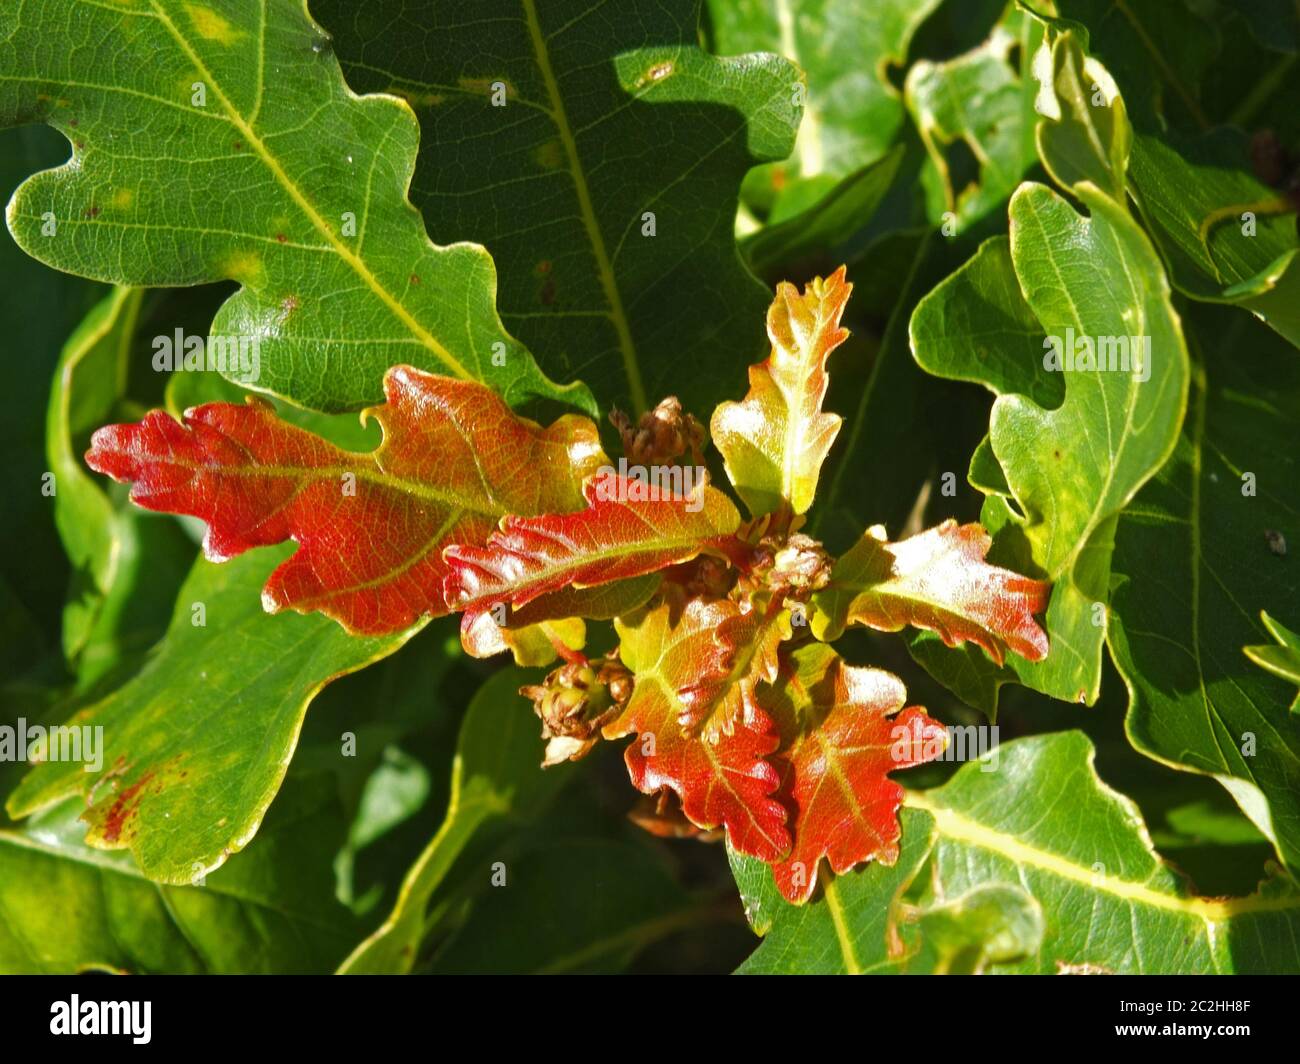 close up of autumn oak leaves turning a bright red color on s bright sunlit day Stock Photo